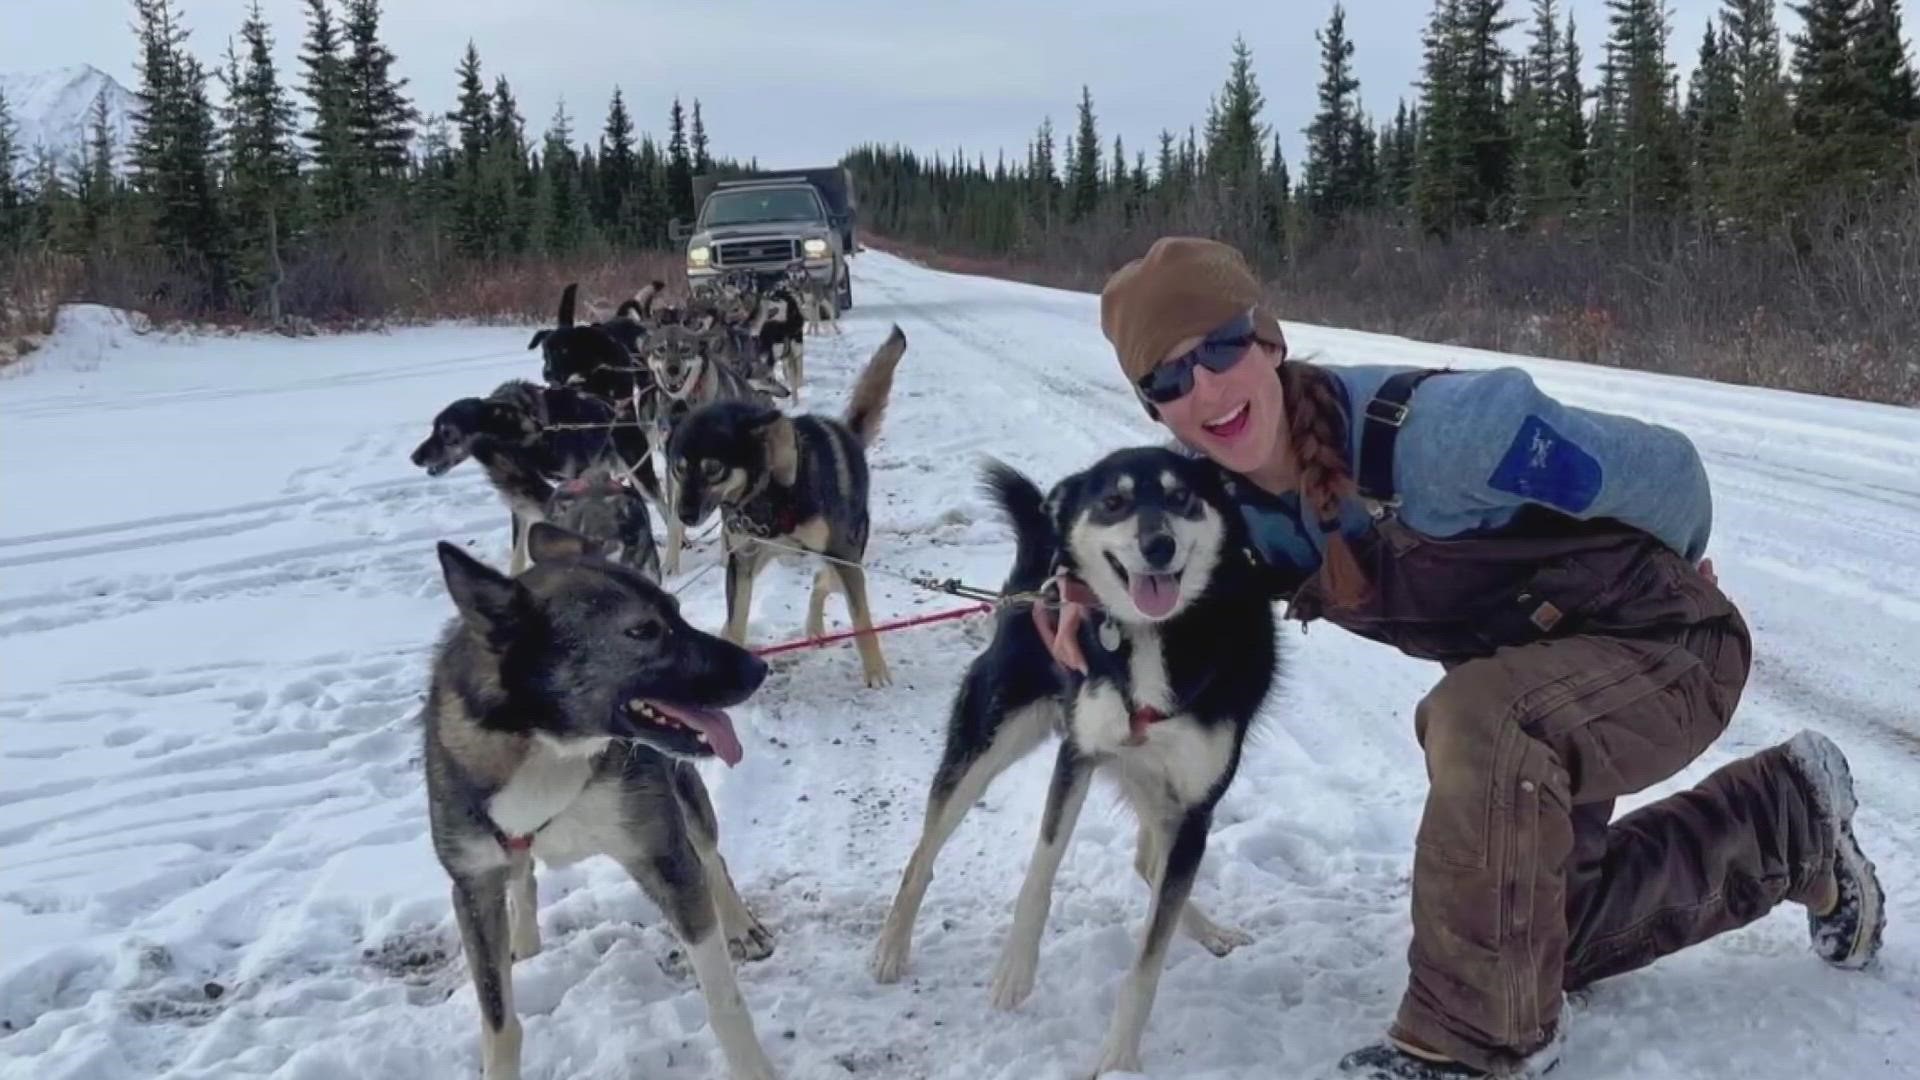 Jennifer LaBar grew up in Knoxville. Now, after living in Alaska for 11 years, she is competing in her first-ever Iditarod dog sled race.